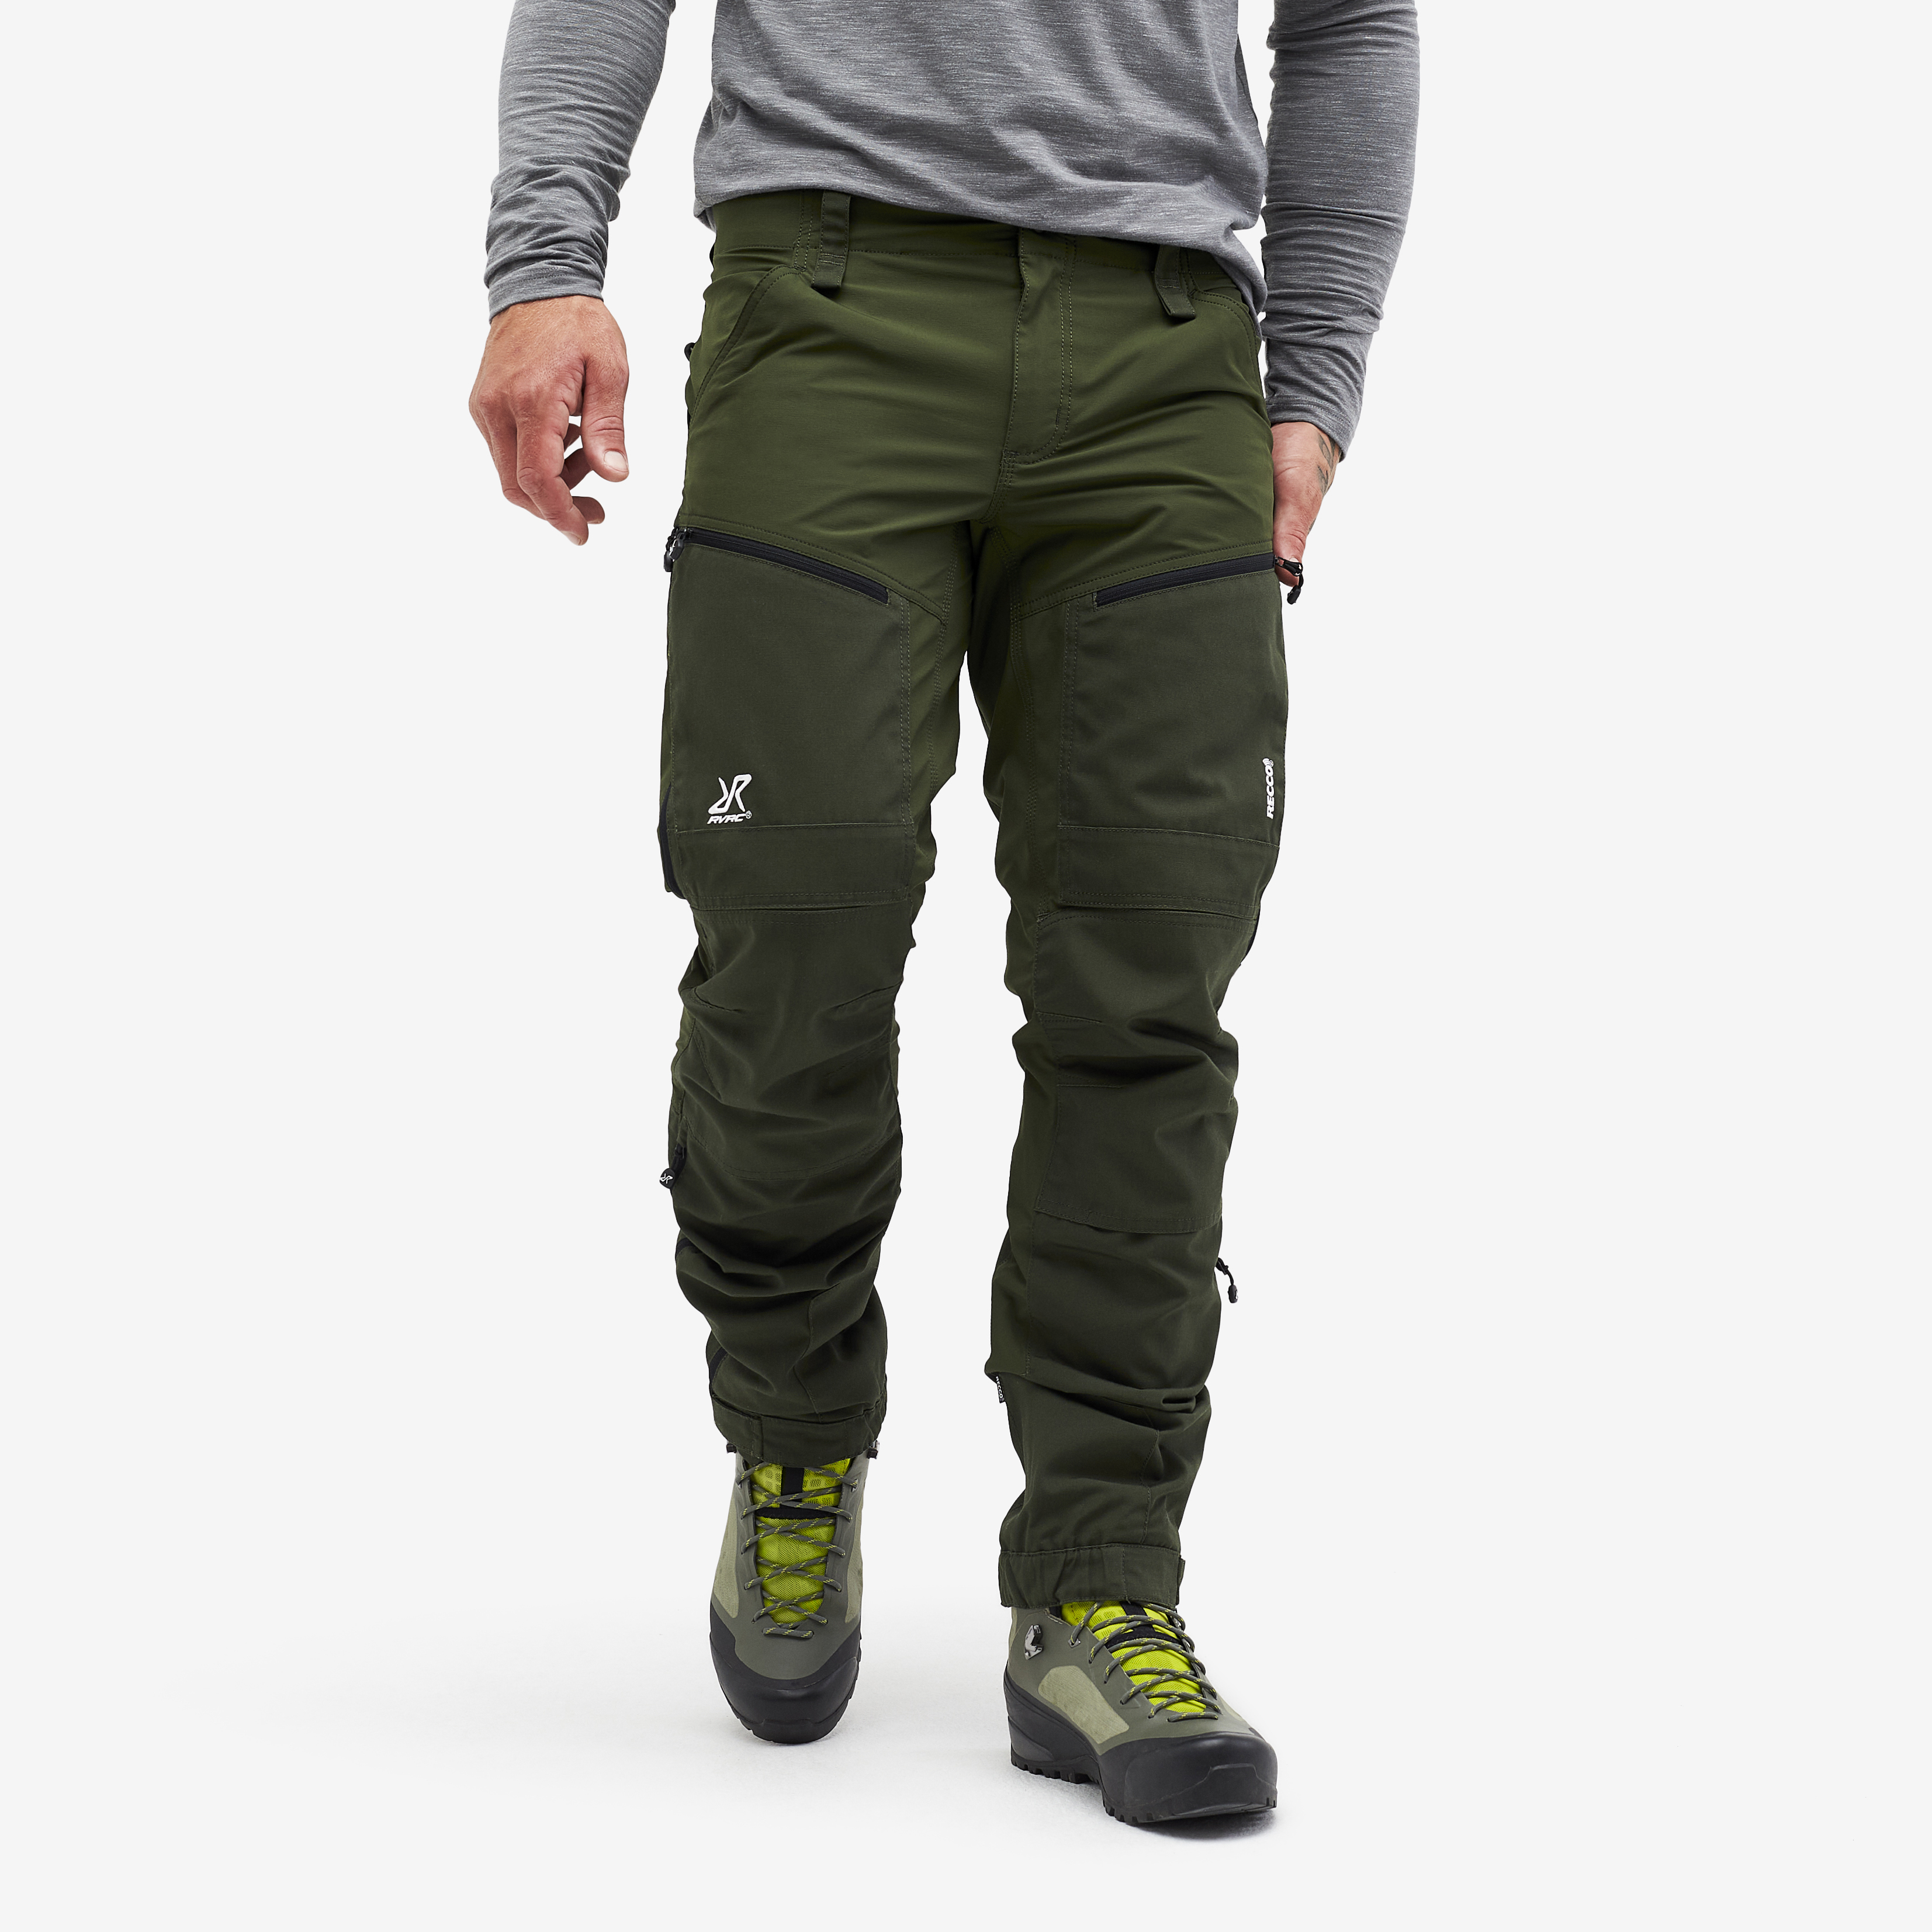 RVRC GP Pro Rescue hiking pants for men in green